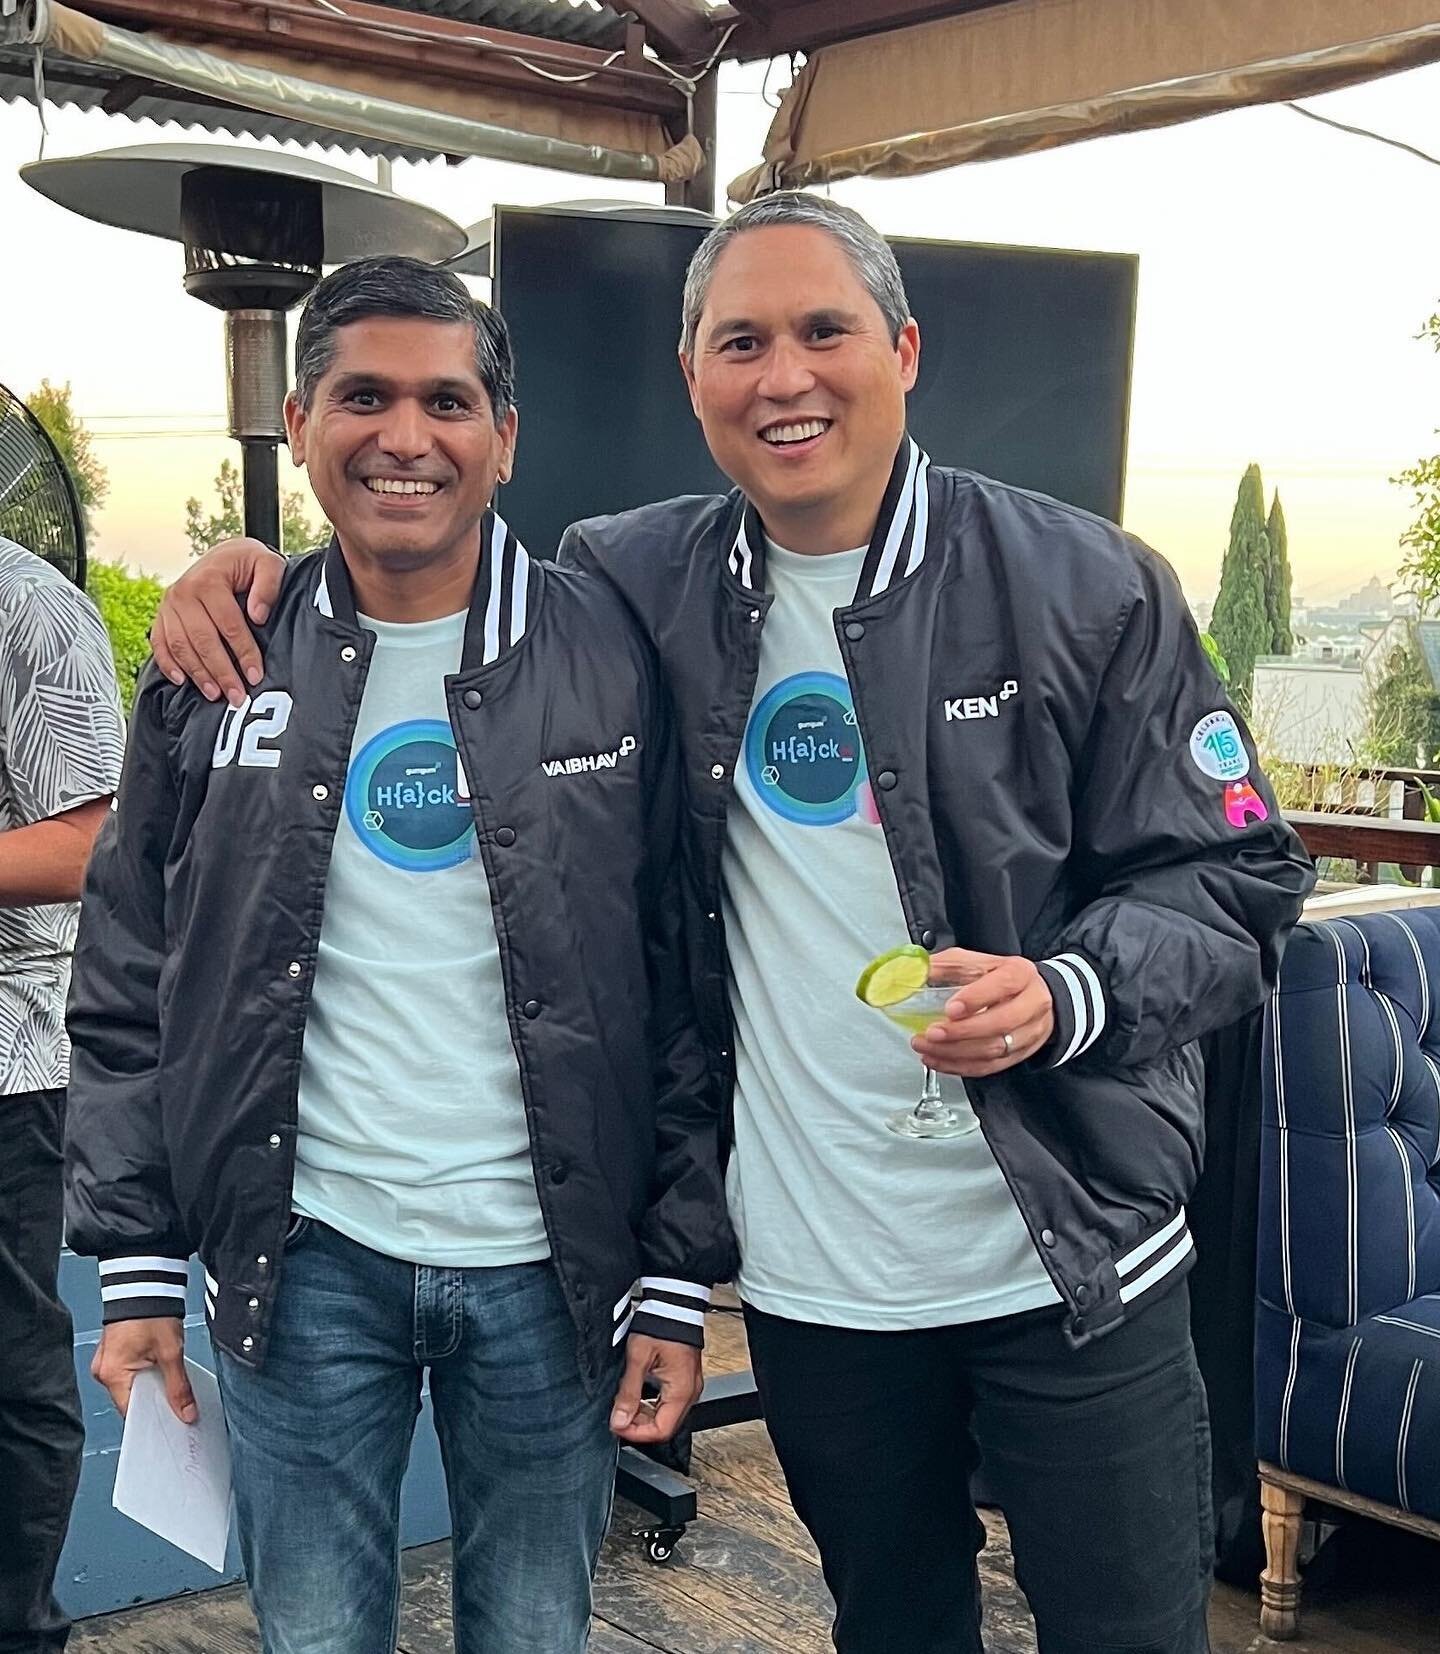 GumGum's first and second employees were our Chief Technology Officer Ken Weiner and our SVP of Engineering Vaibhav Puranik, and they just recently celebrated 1️⃣ 5️⃣ years at GumGum! 

Ken and Vaibhav are the brains behind so much of our operation a